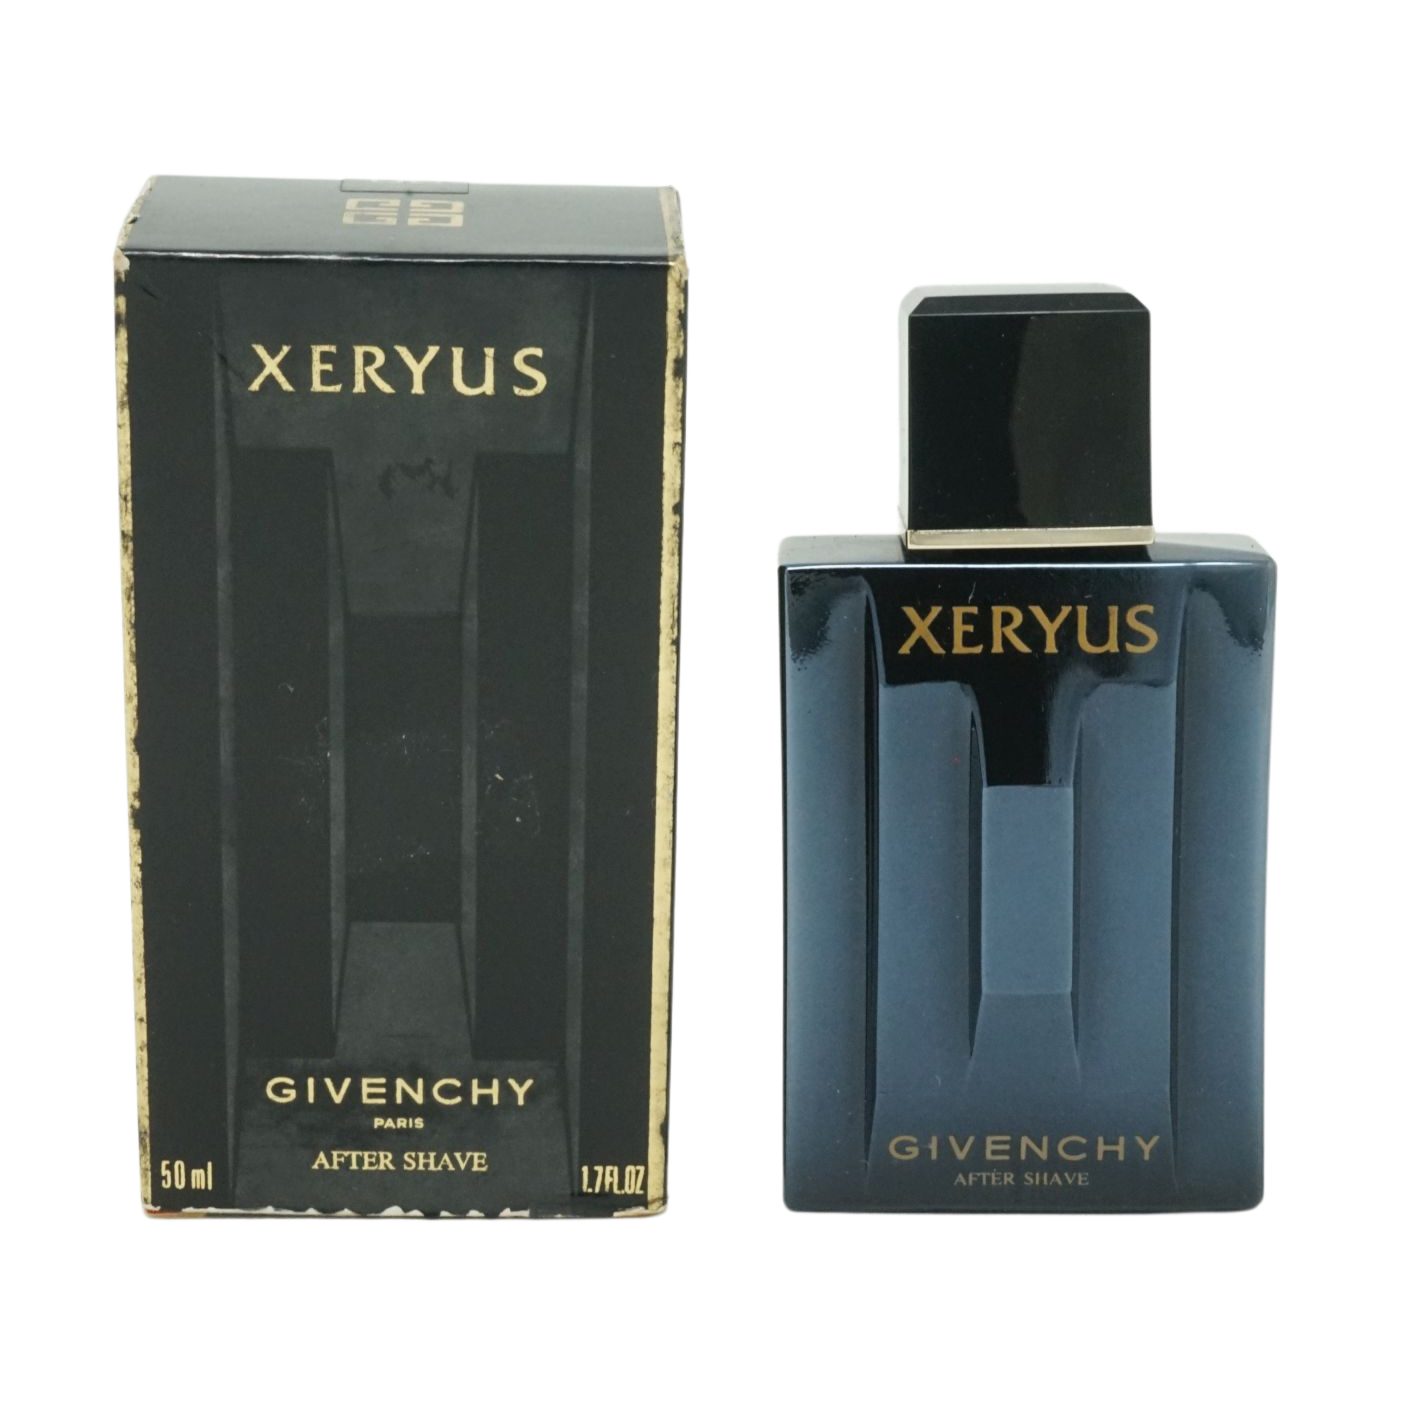 GIVENCHY After-Shave Givenchy Paris Xeryus After Shave 50ml